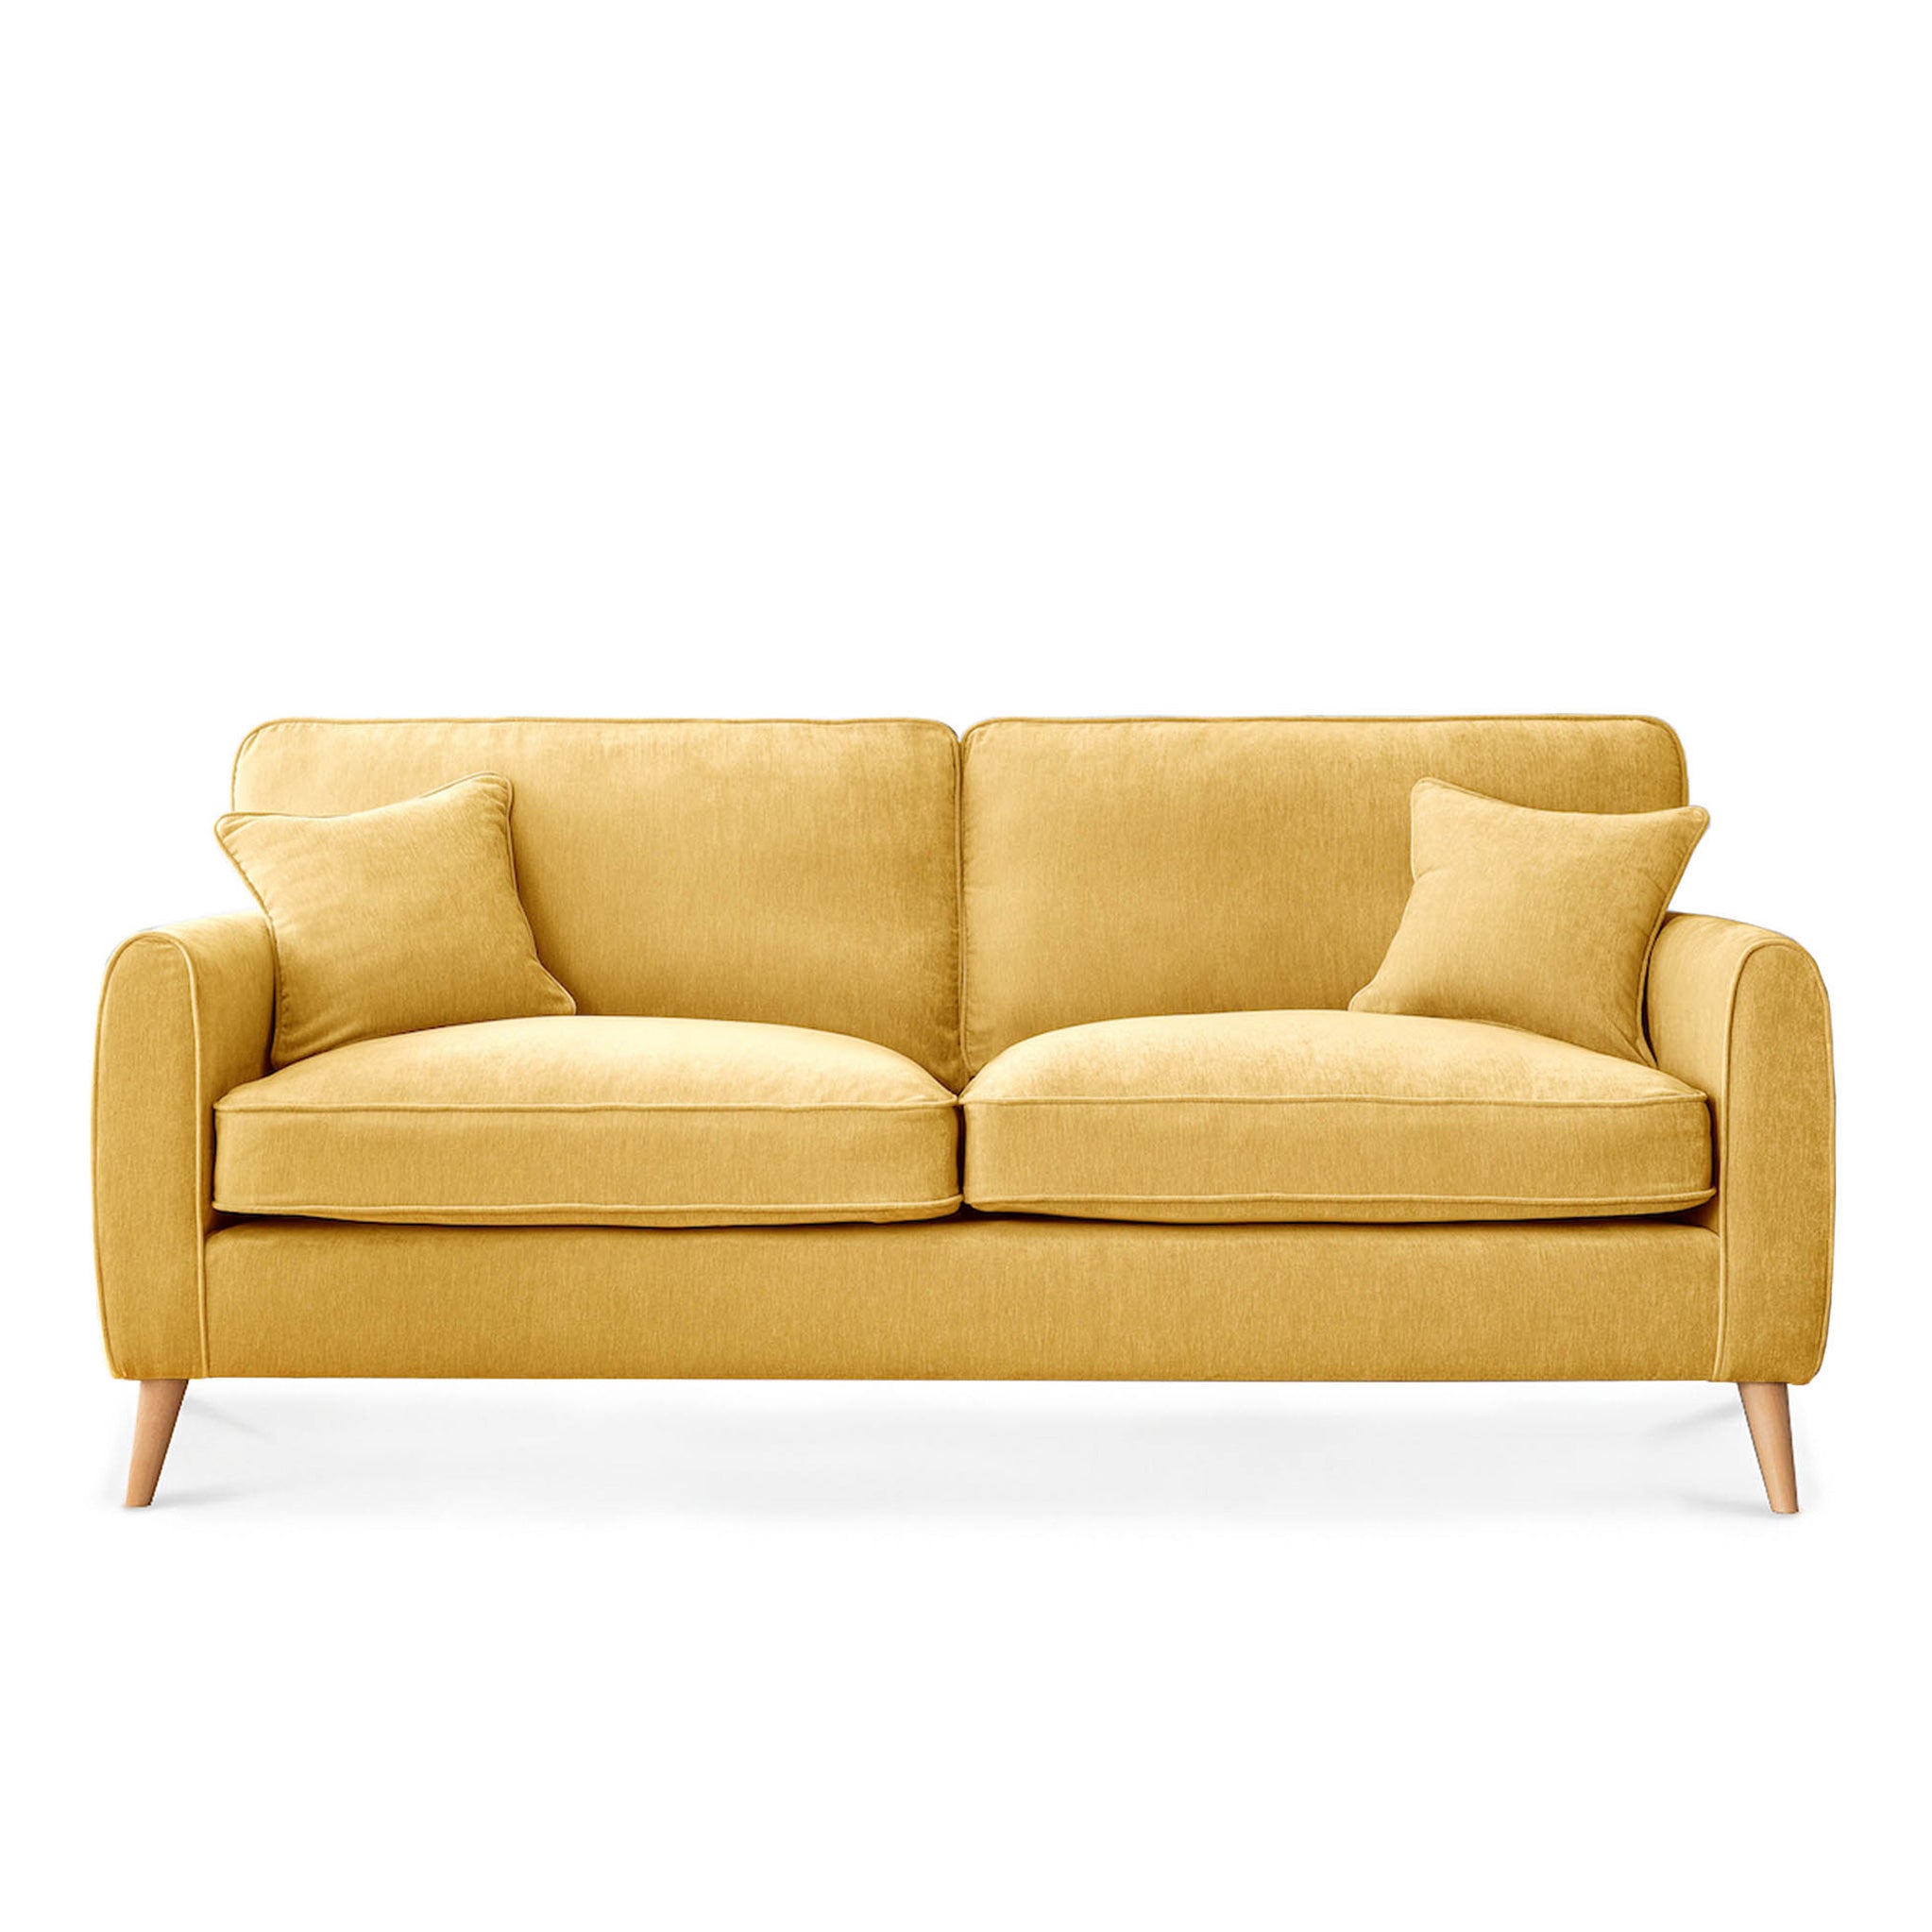 Ada 4 Seater Sofa 8 Chenille Colours Made In The Uk Roseland